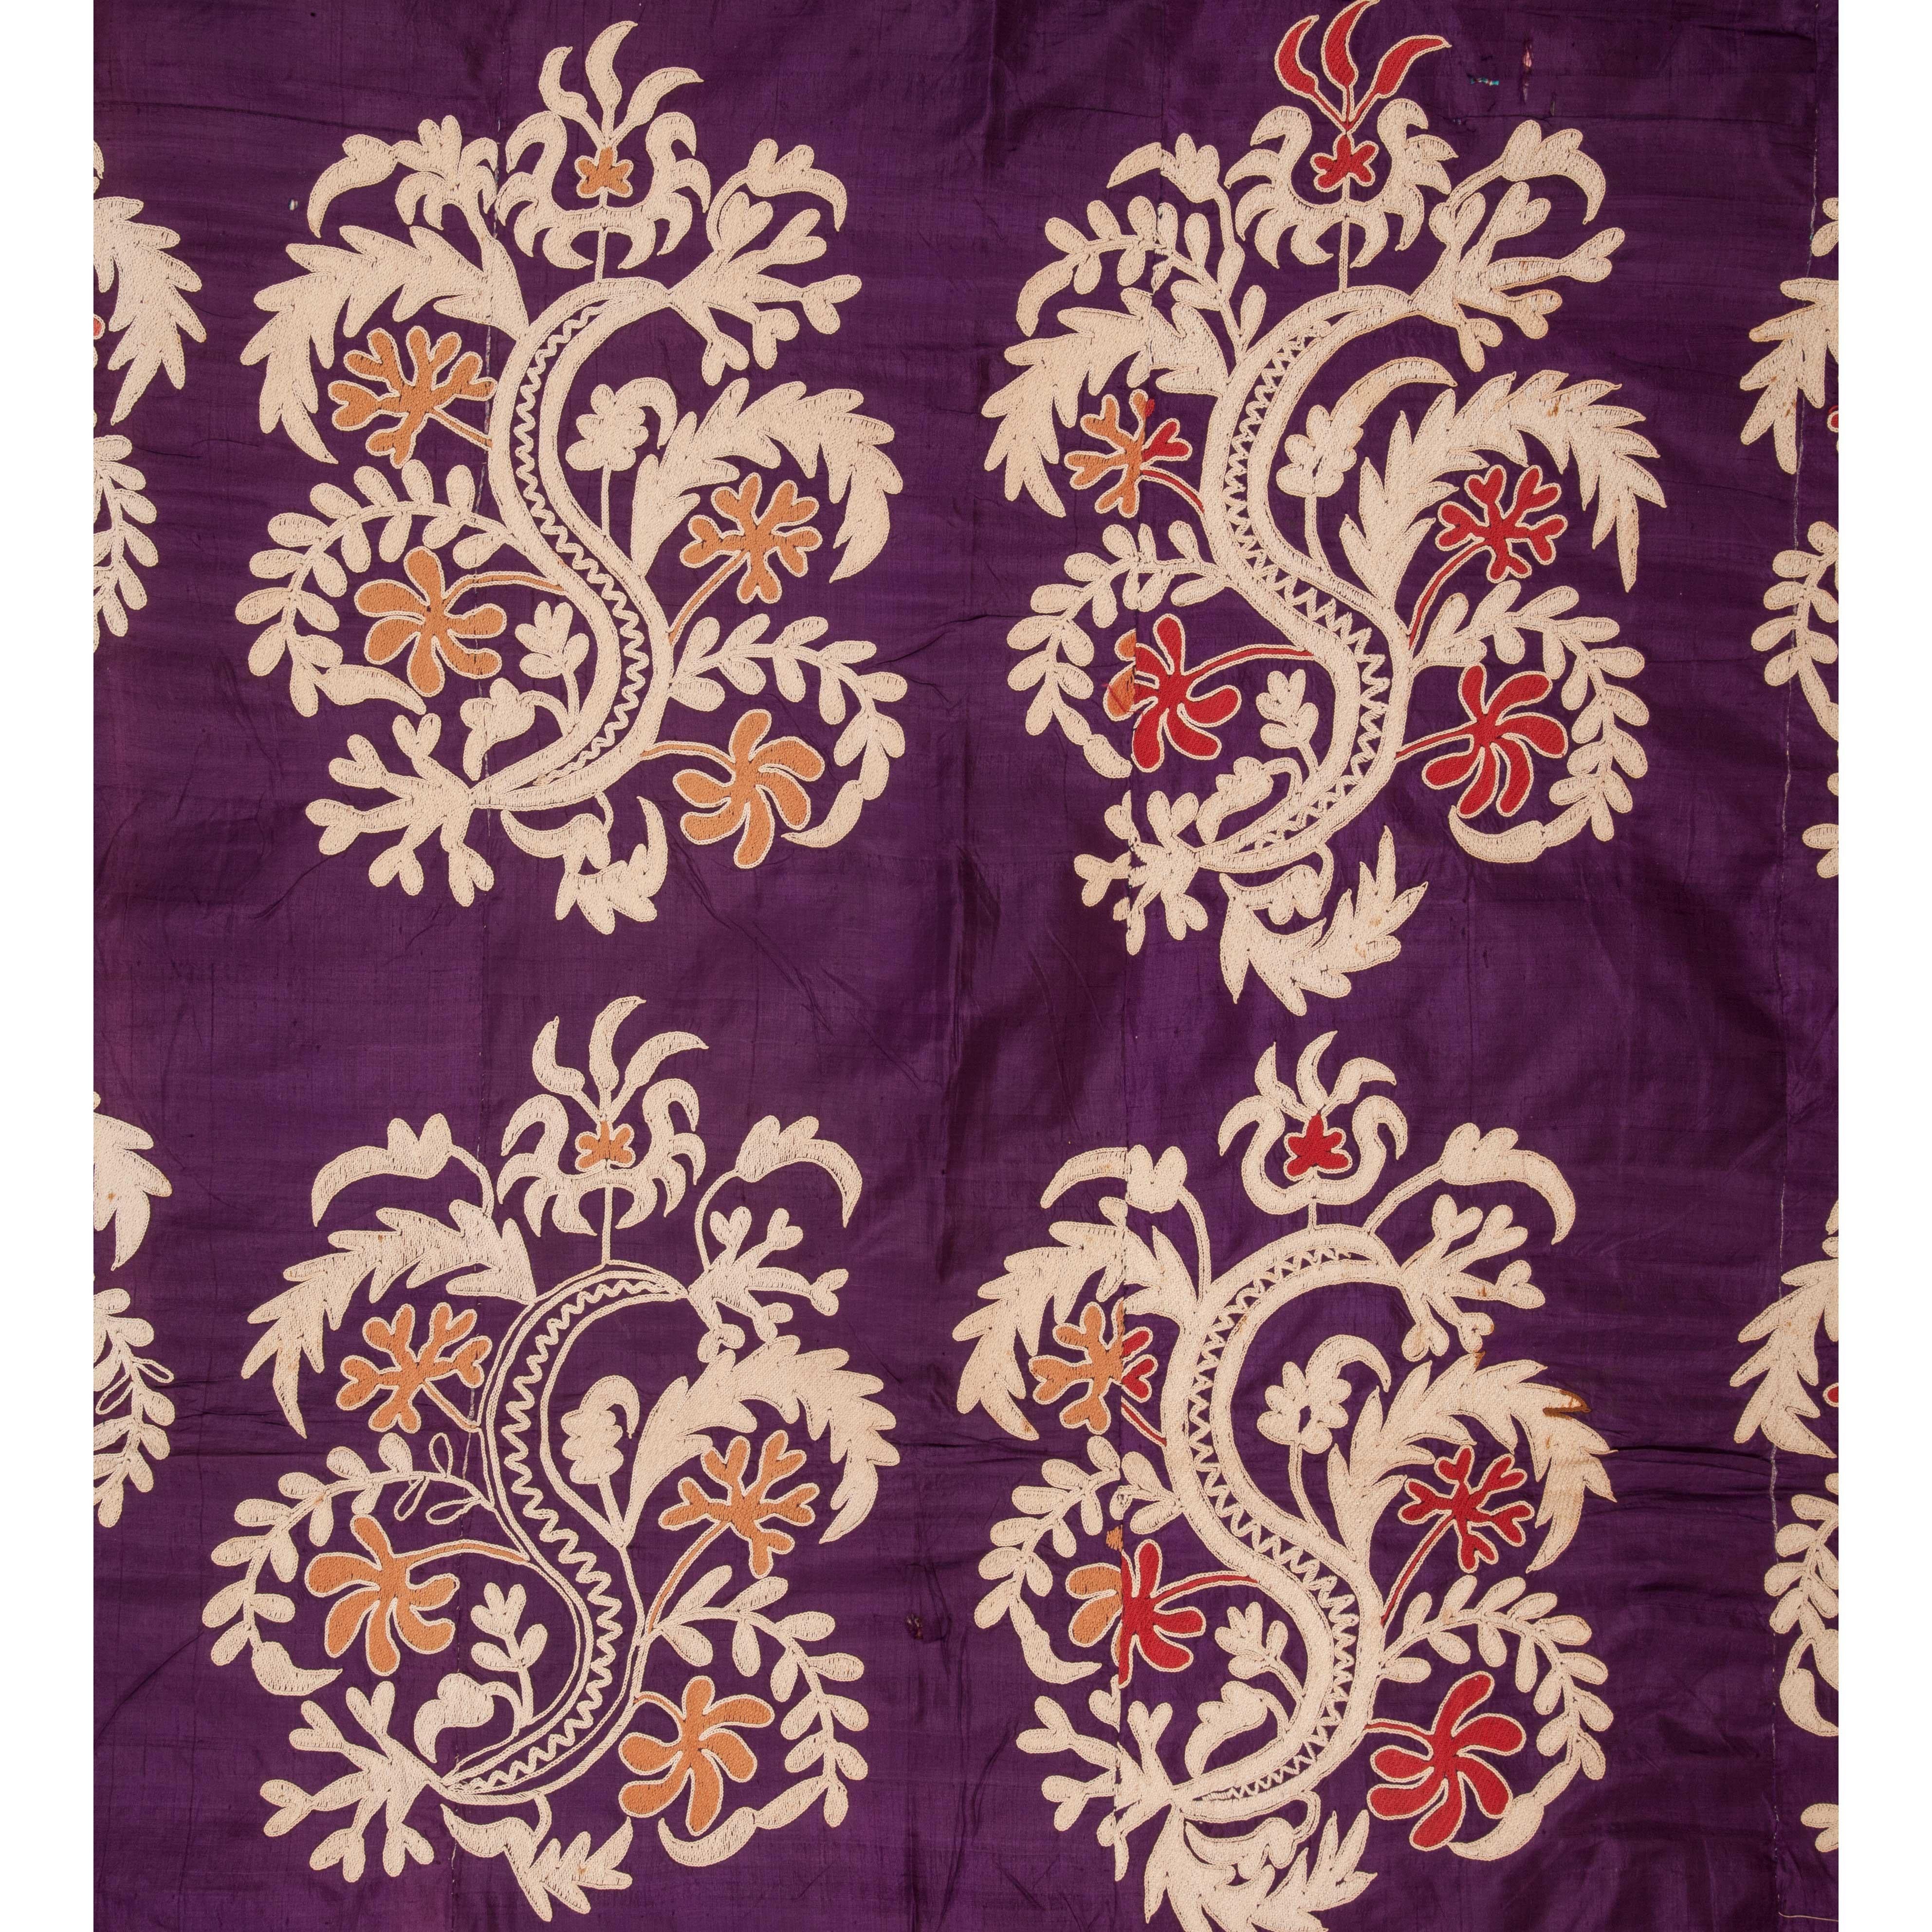 Embroidered Early 20th Century Pure Silk Suzani from Uzbekistan Central Asia